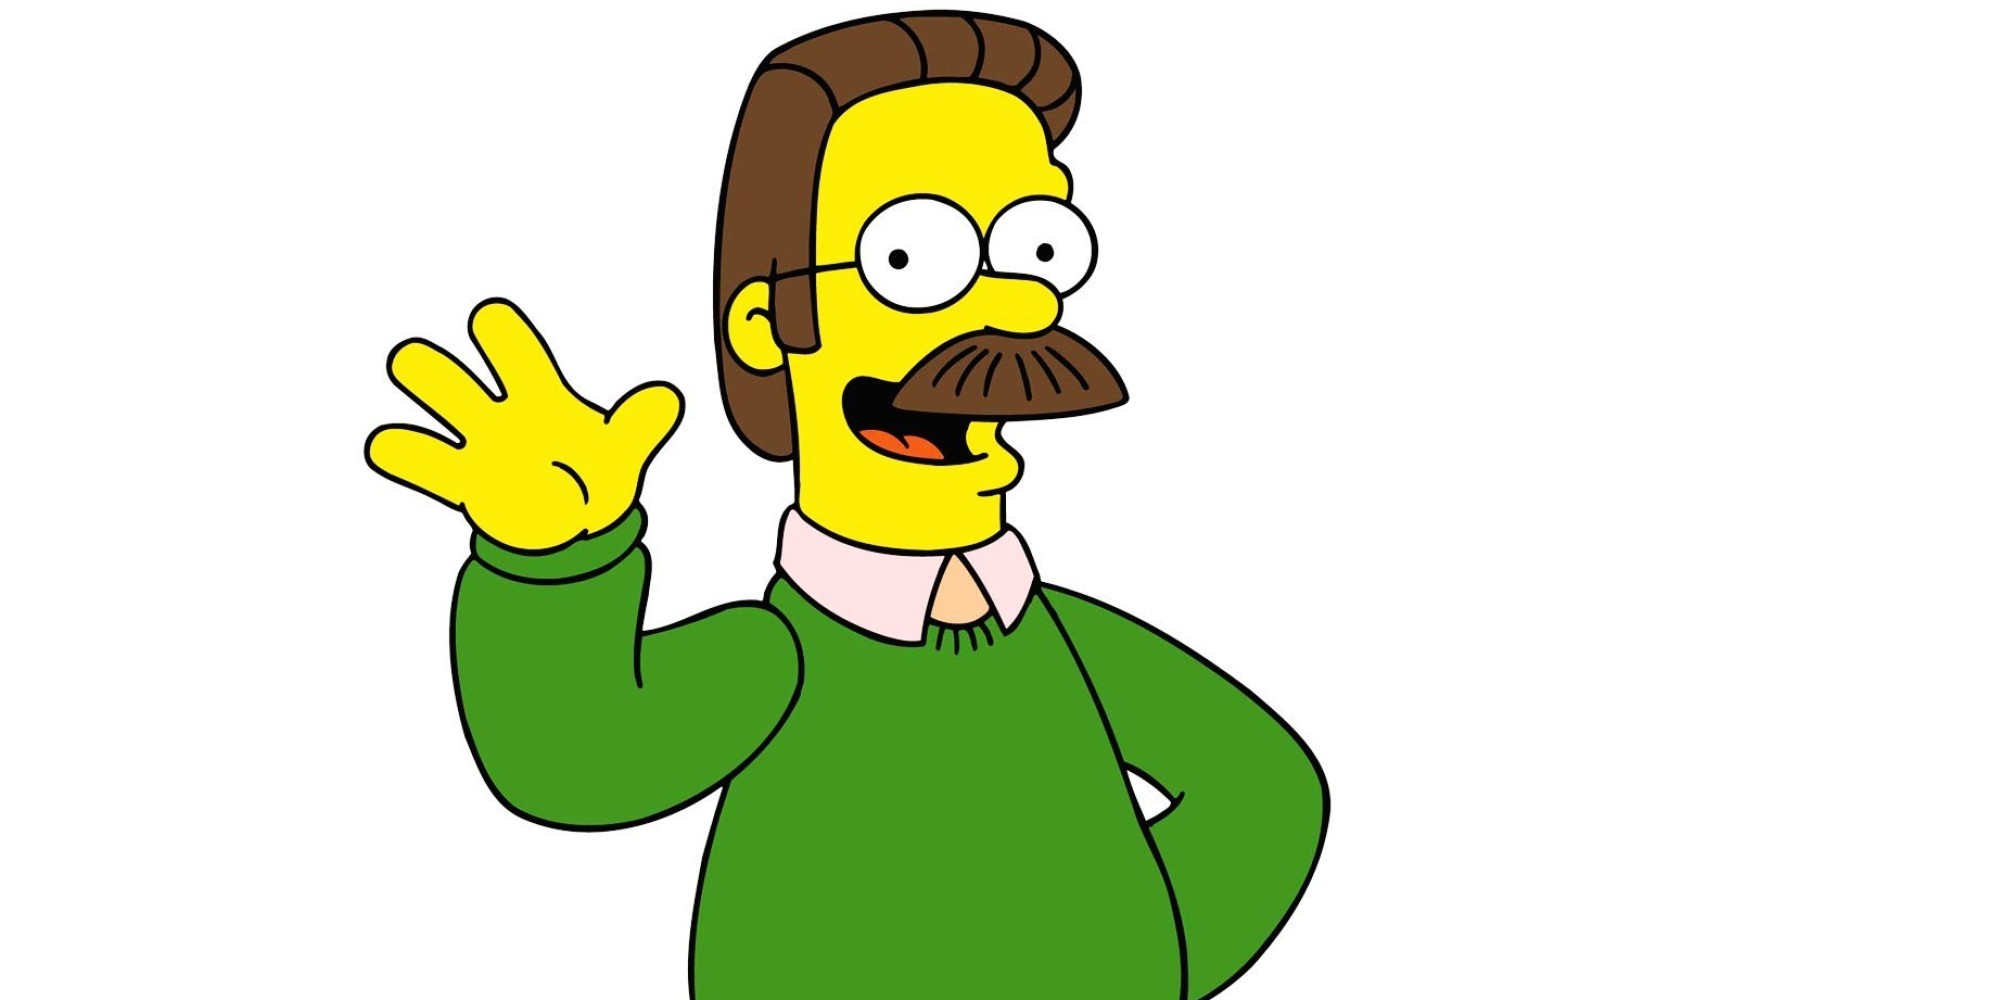 THE SIMPSONS, Ned Flanders, 1989-present. TM and Copyright © 20th Century Fox Film Corp. All rights reserved.